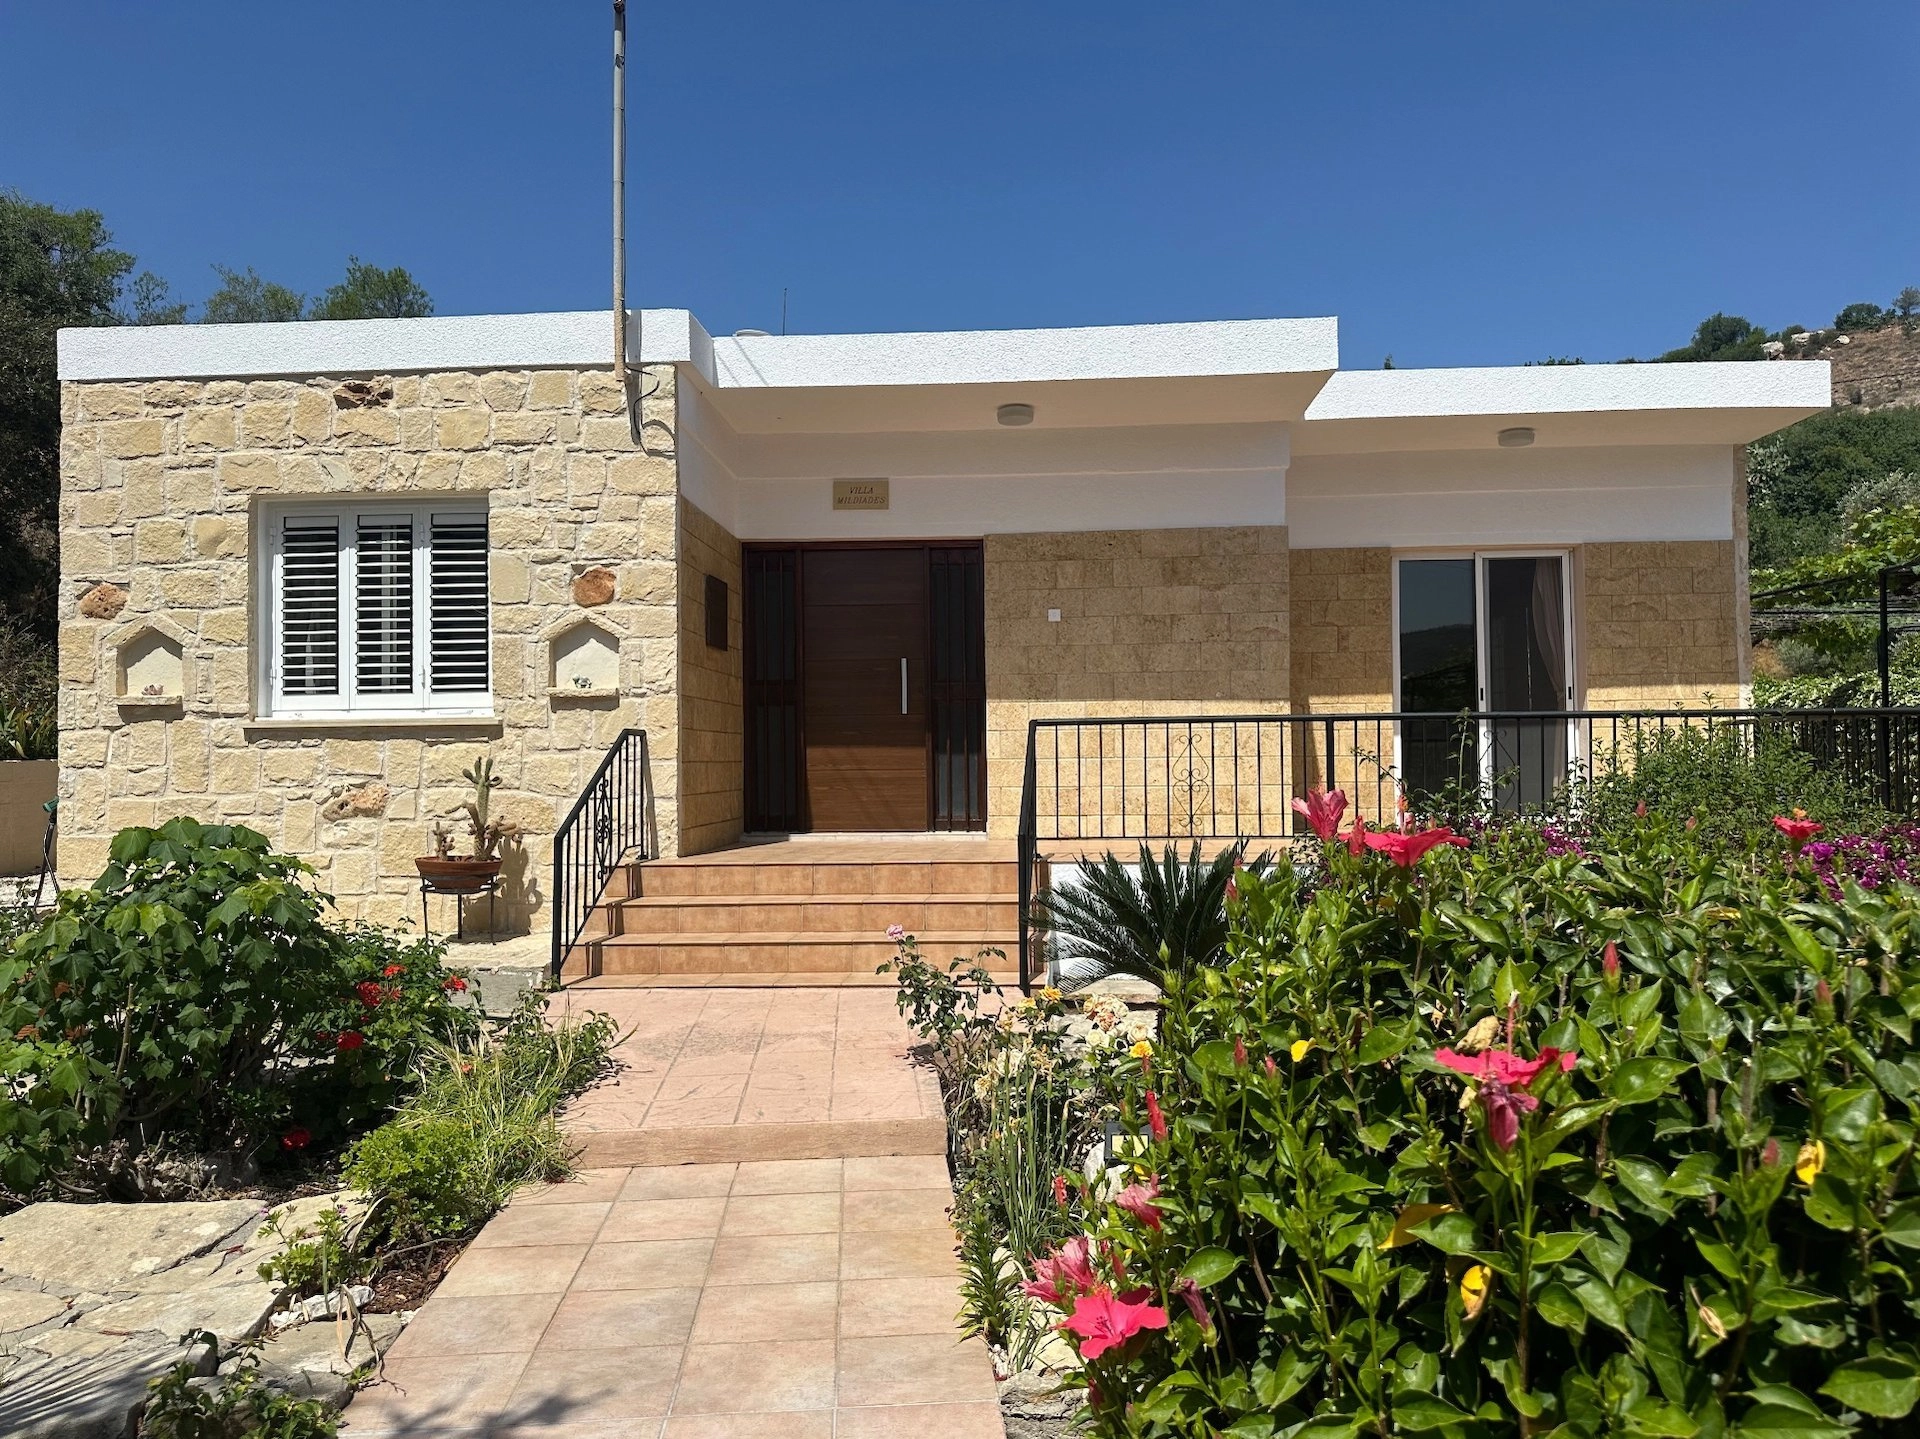 3 Bedroom House for Rent in Paphos District